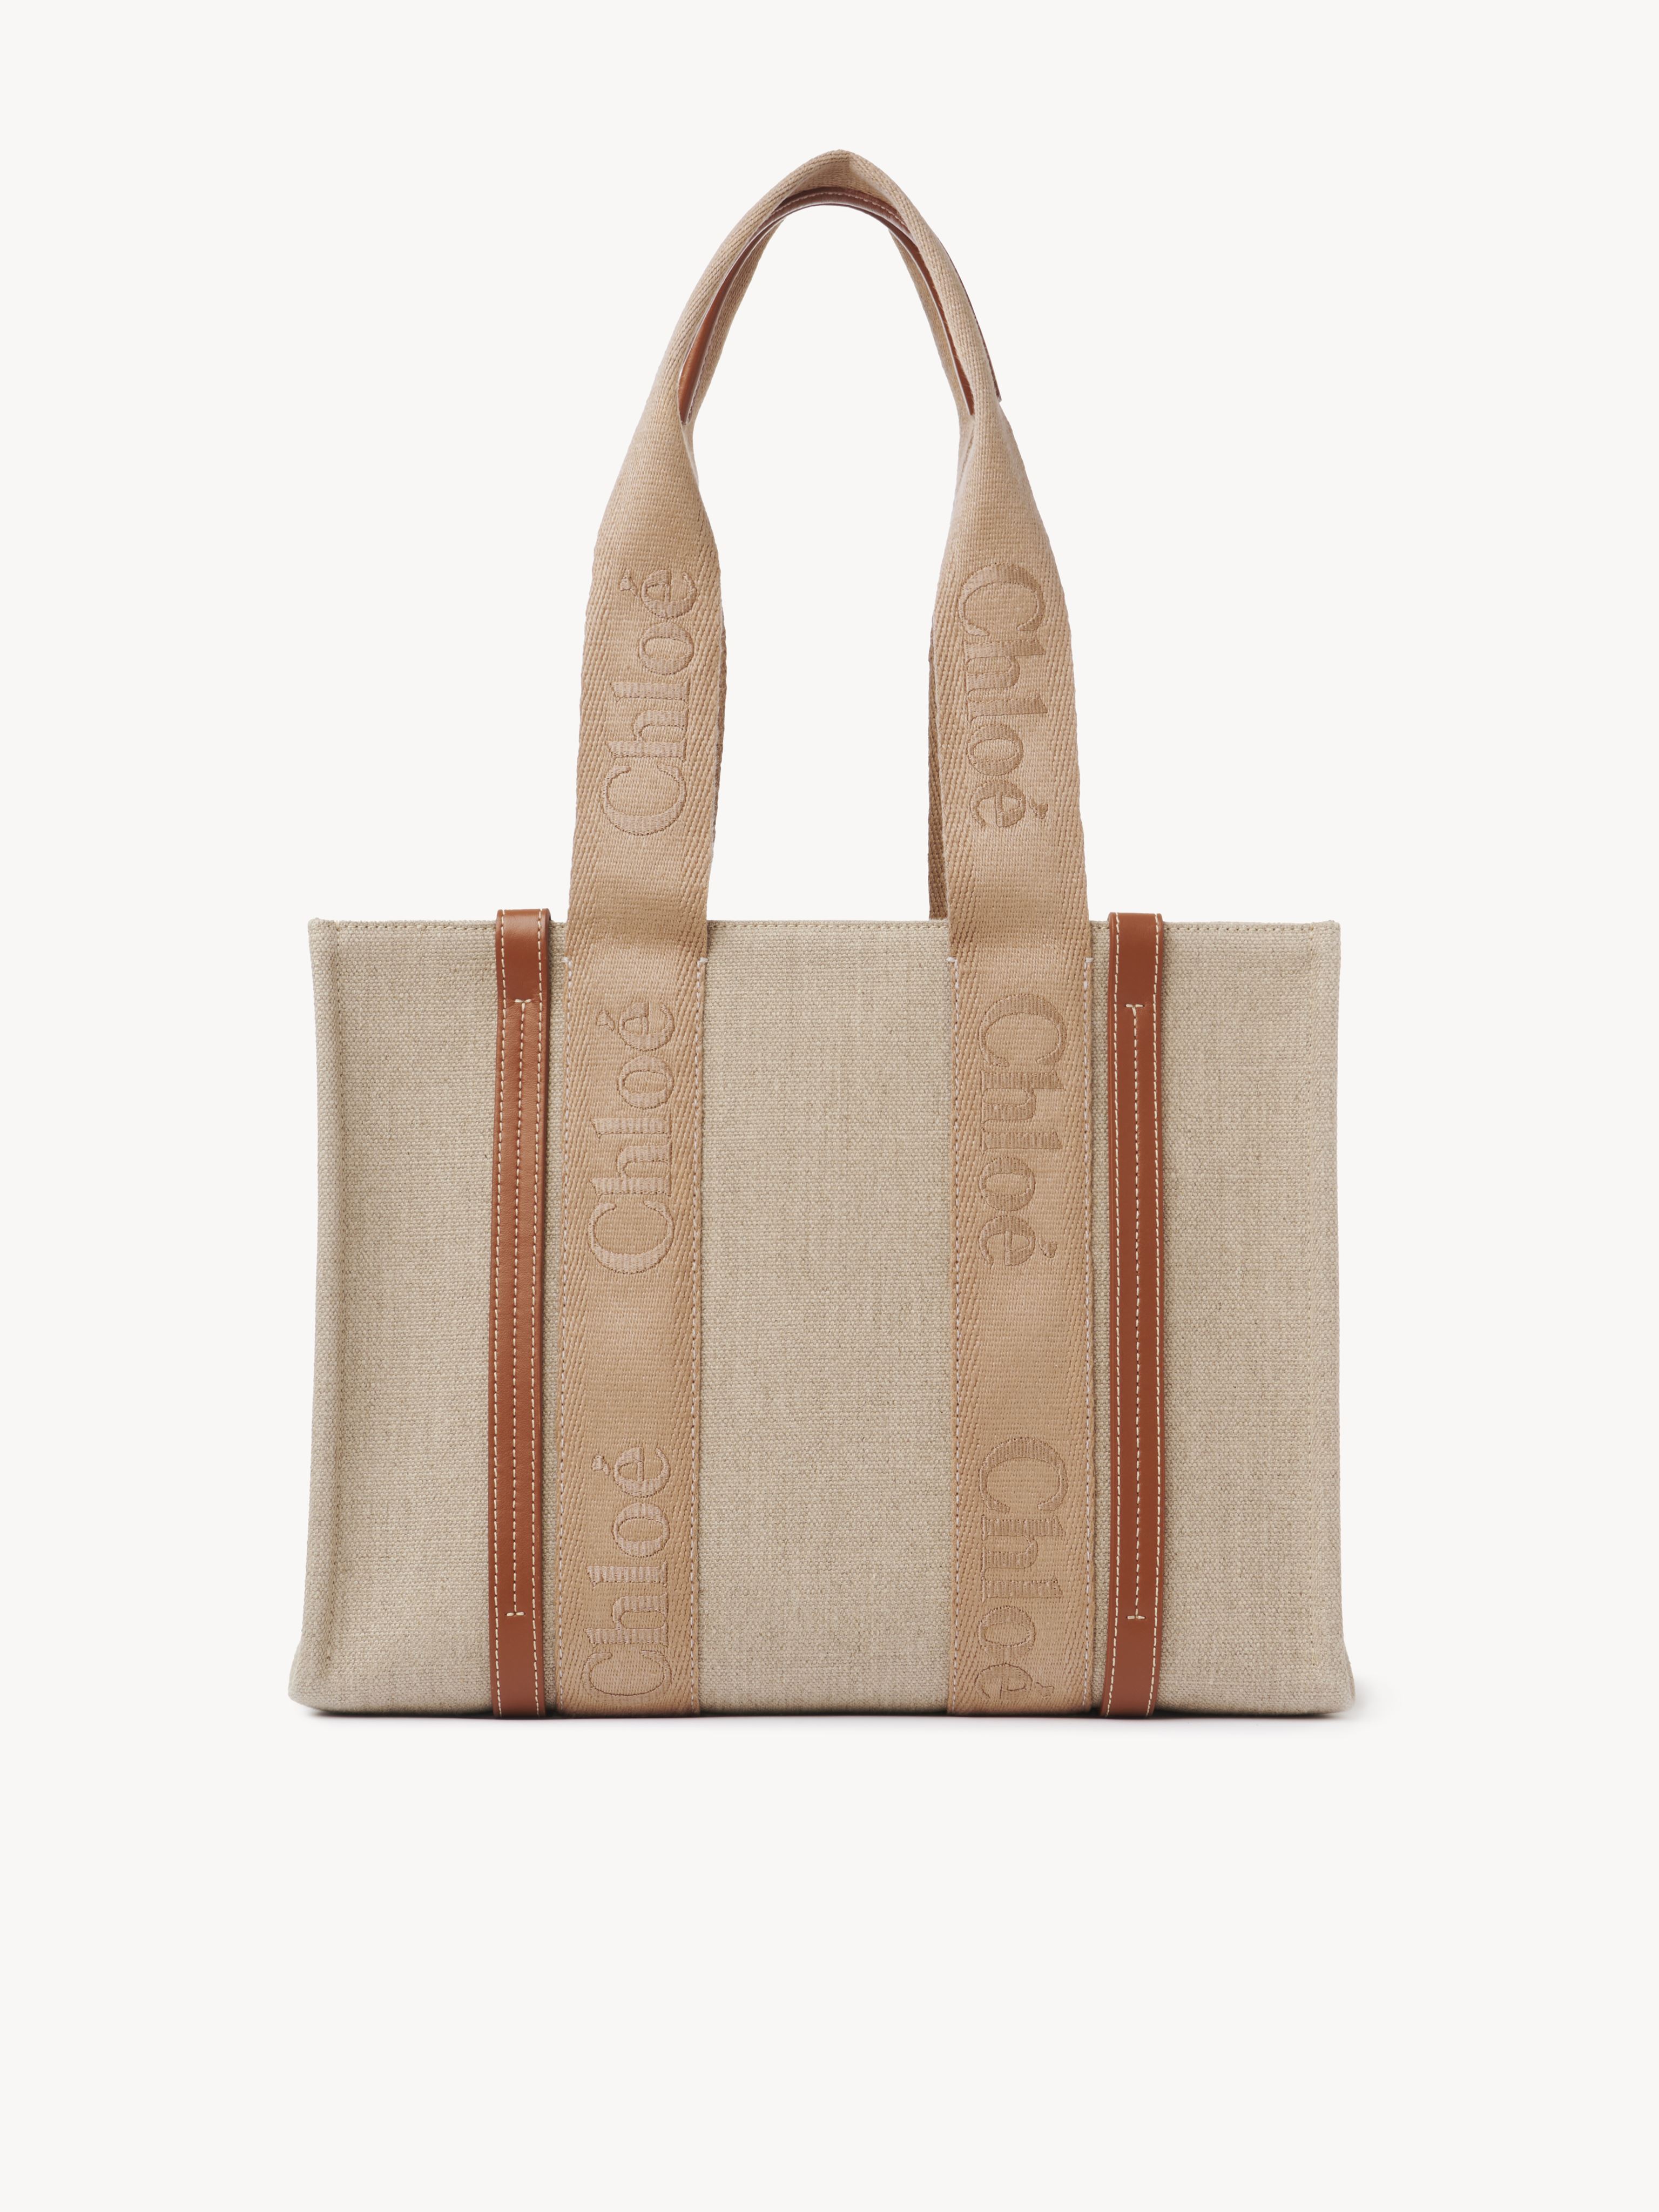 Chloé Woody Tote Bag In Linen Orange Size Onesize 100% Linen, Calf-skin Leather, Polyester